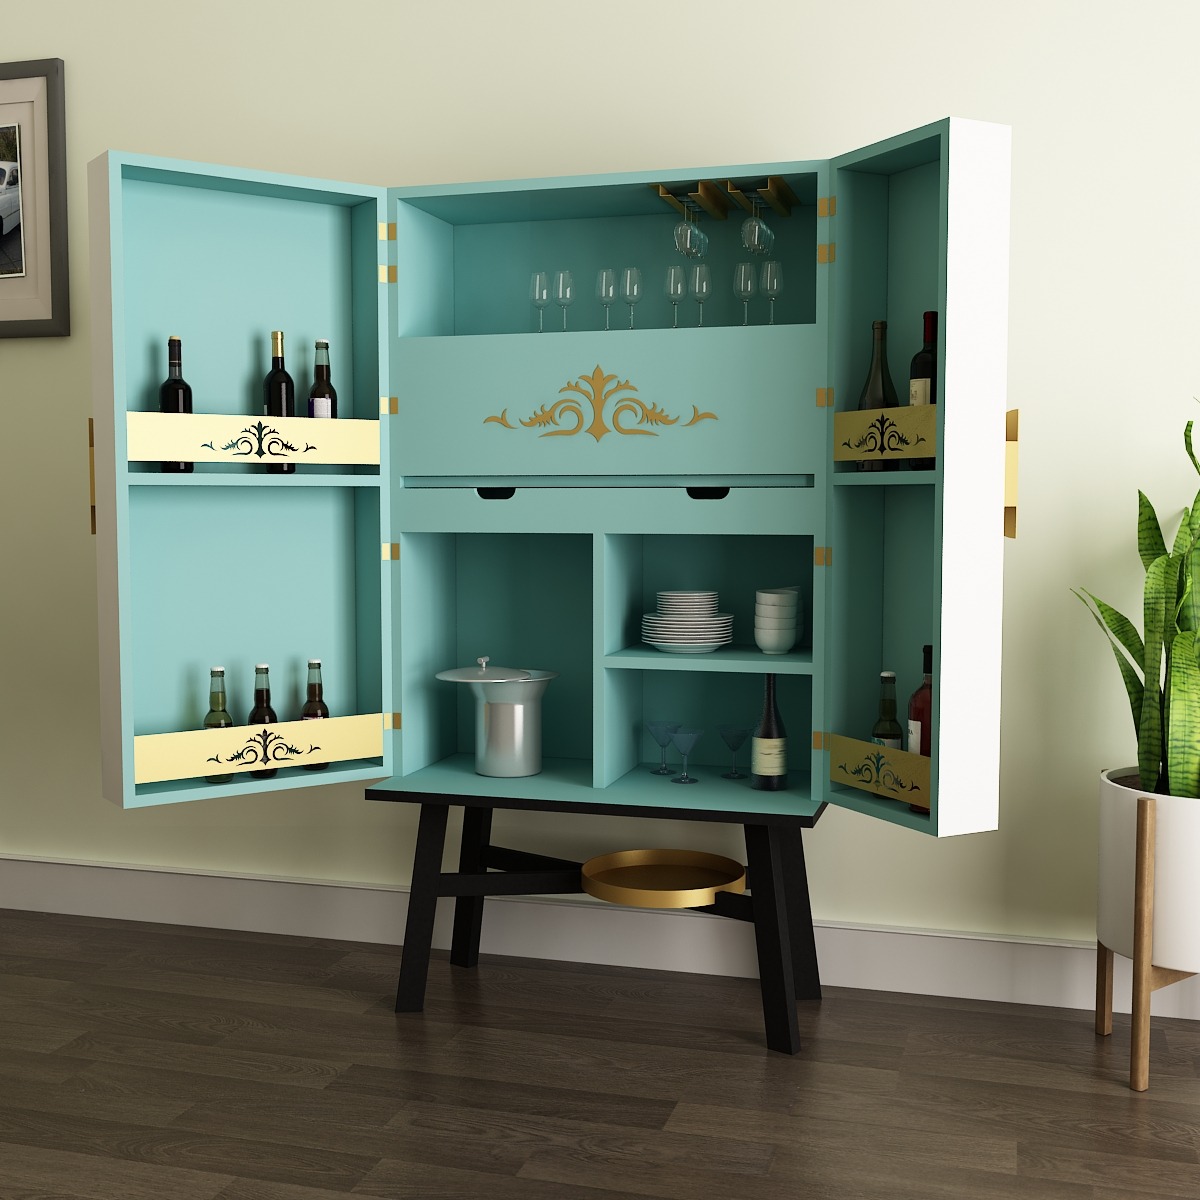  How Can I Flaunt My Mini Home Bar With Bar Furniture?